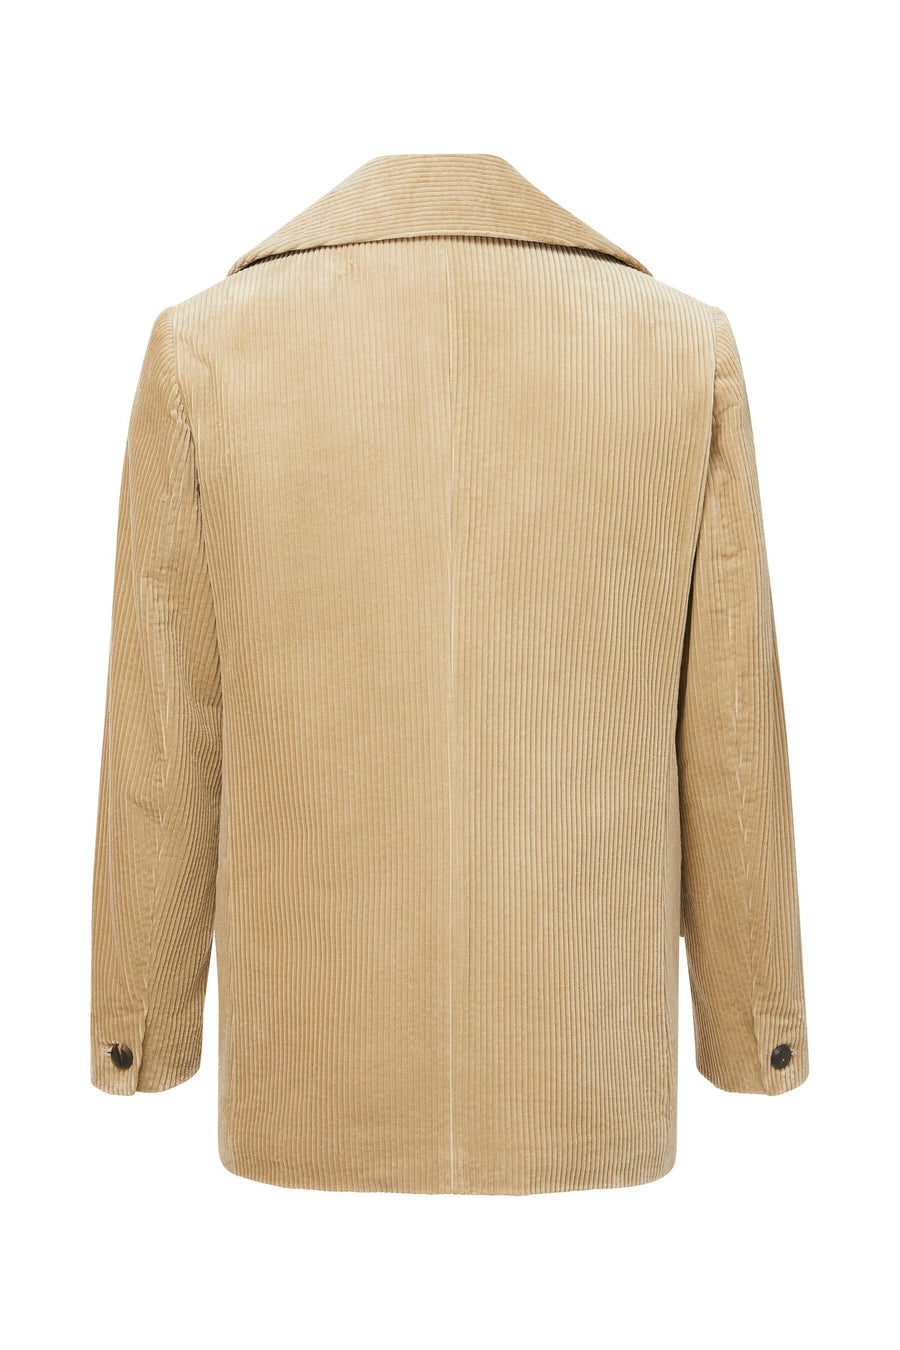 Luxury men's beige corduroy jacket with black and white wool/cotton lining. Back